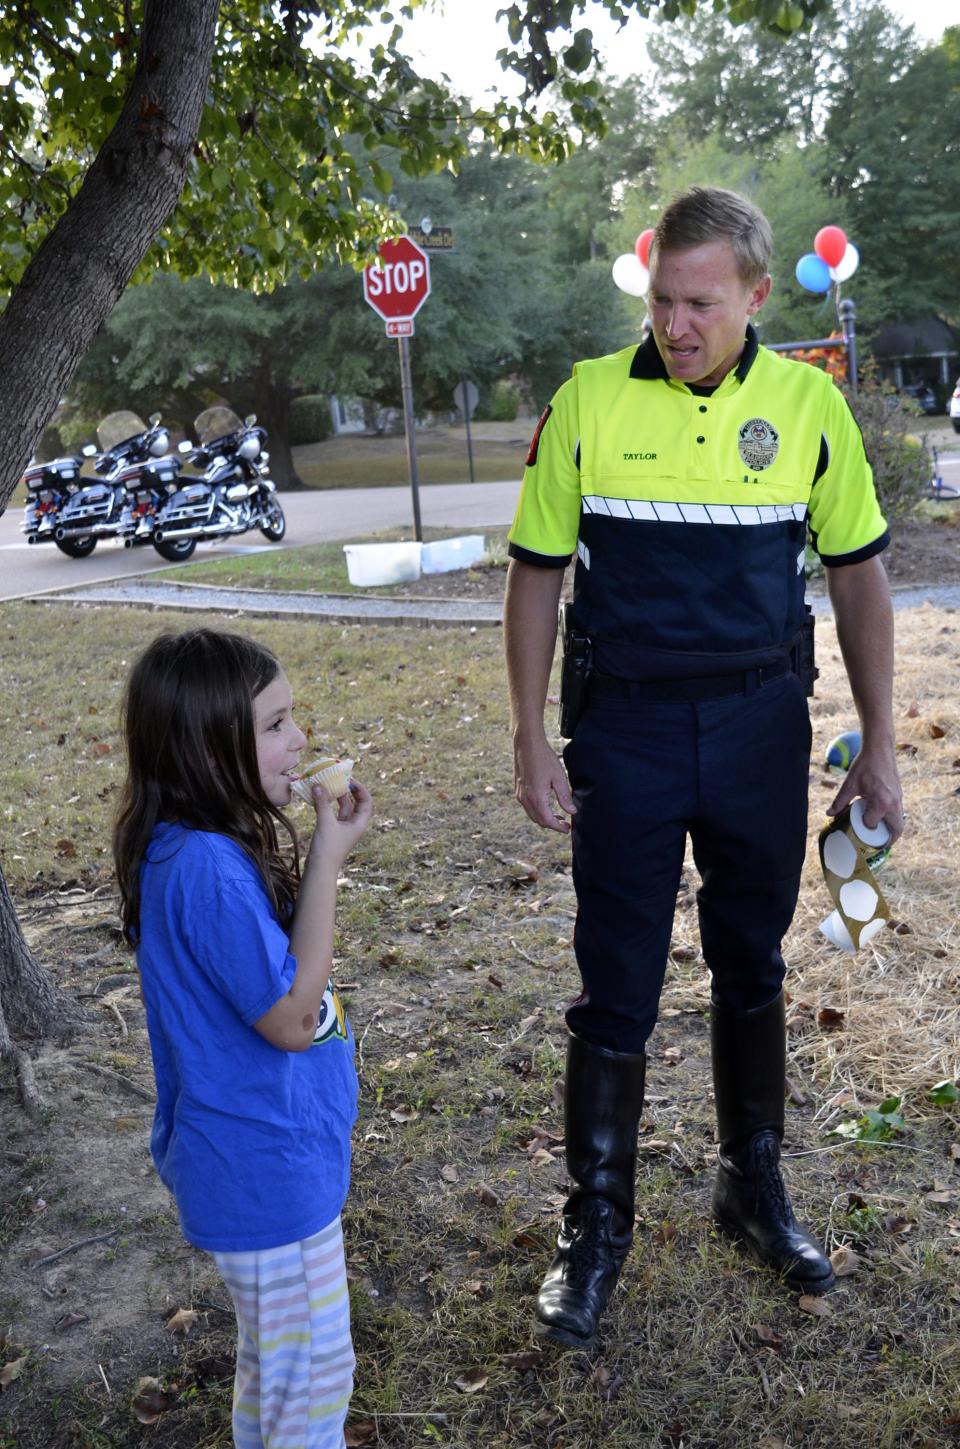 Lt. Micah Taylor with the Madison Police Department talks with Lucy Kaye Stokley, 7, of Madison during Night Out festivities held at the Cobblestone subdivision in Madison on Tuesday, Oct. 3.